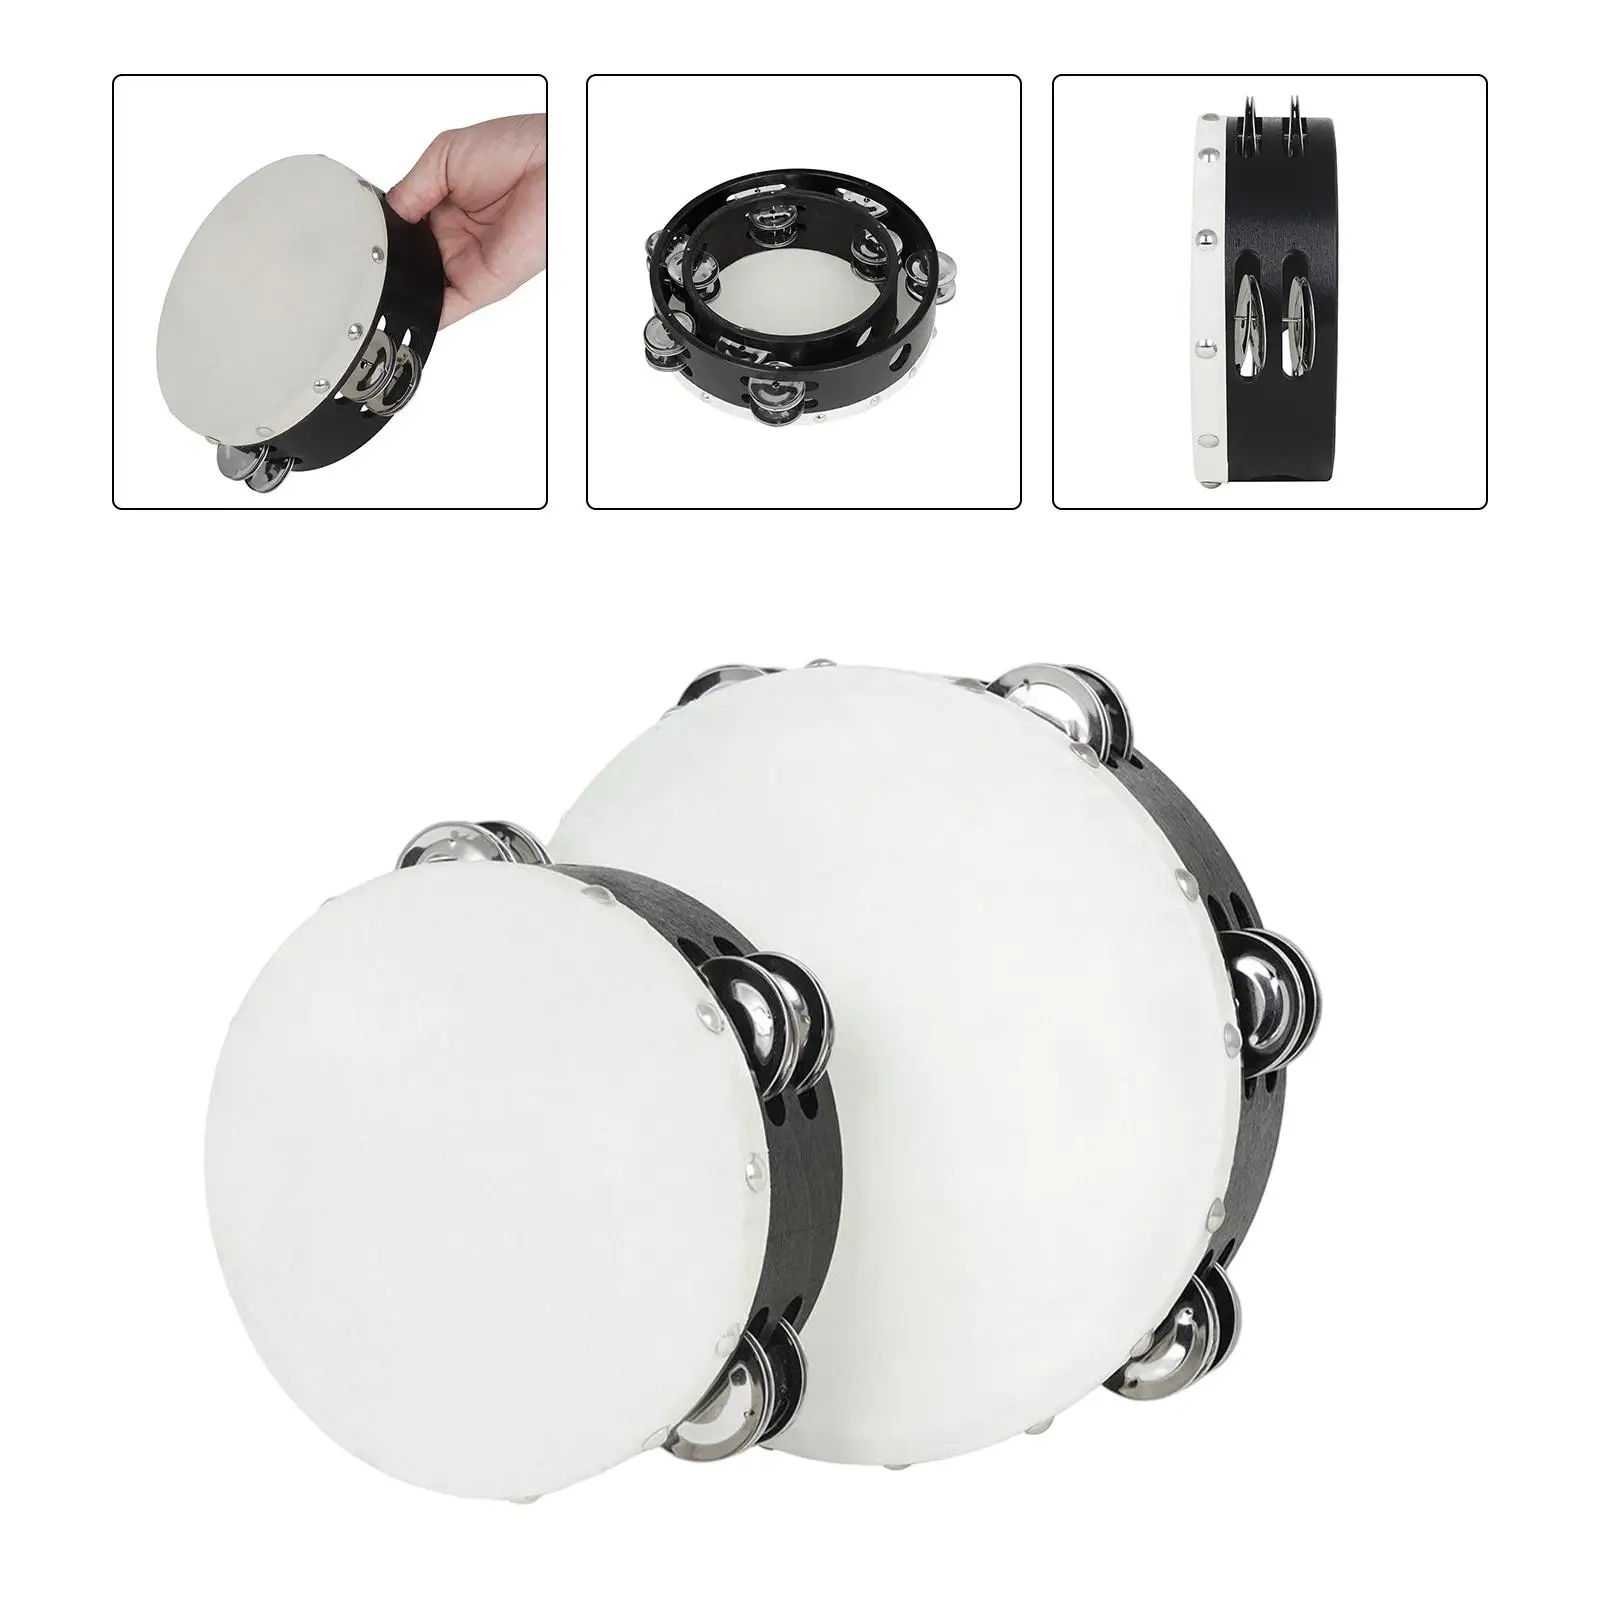 2 Pieces (8 Inch and 6in) Wood Handheld Tambourine Drum, Double Row Metal Wooden Tambourines Musical Percussion Instrument